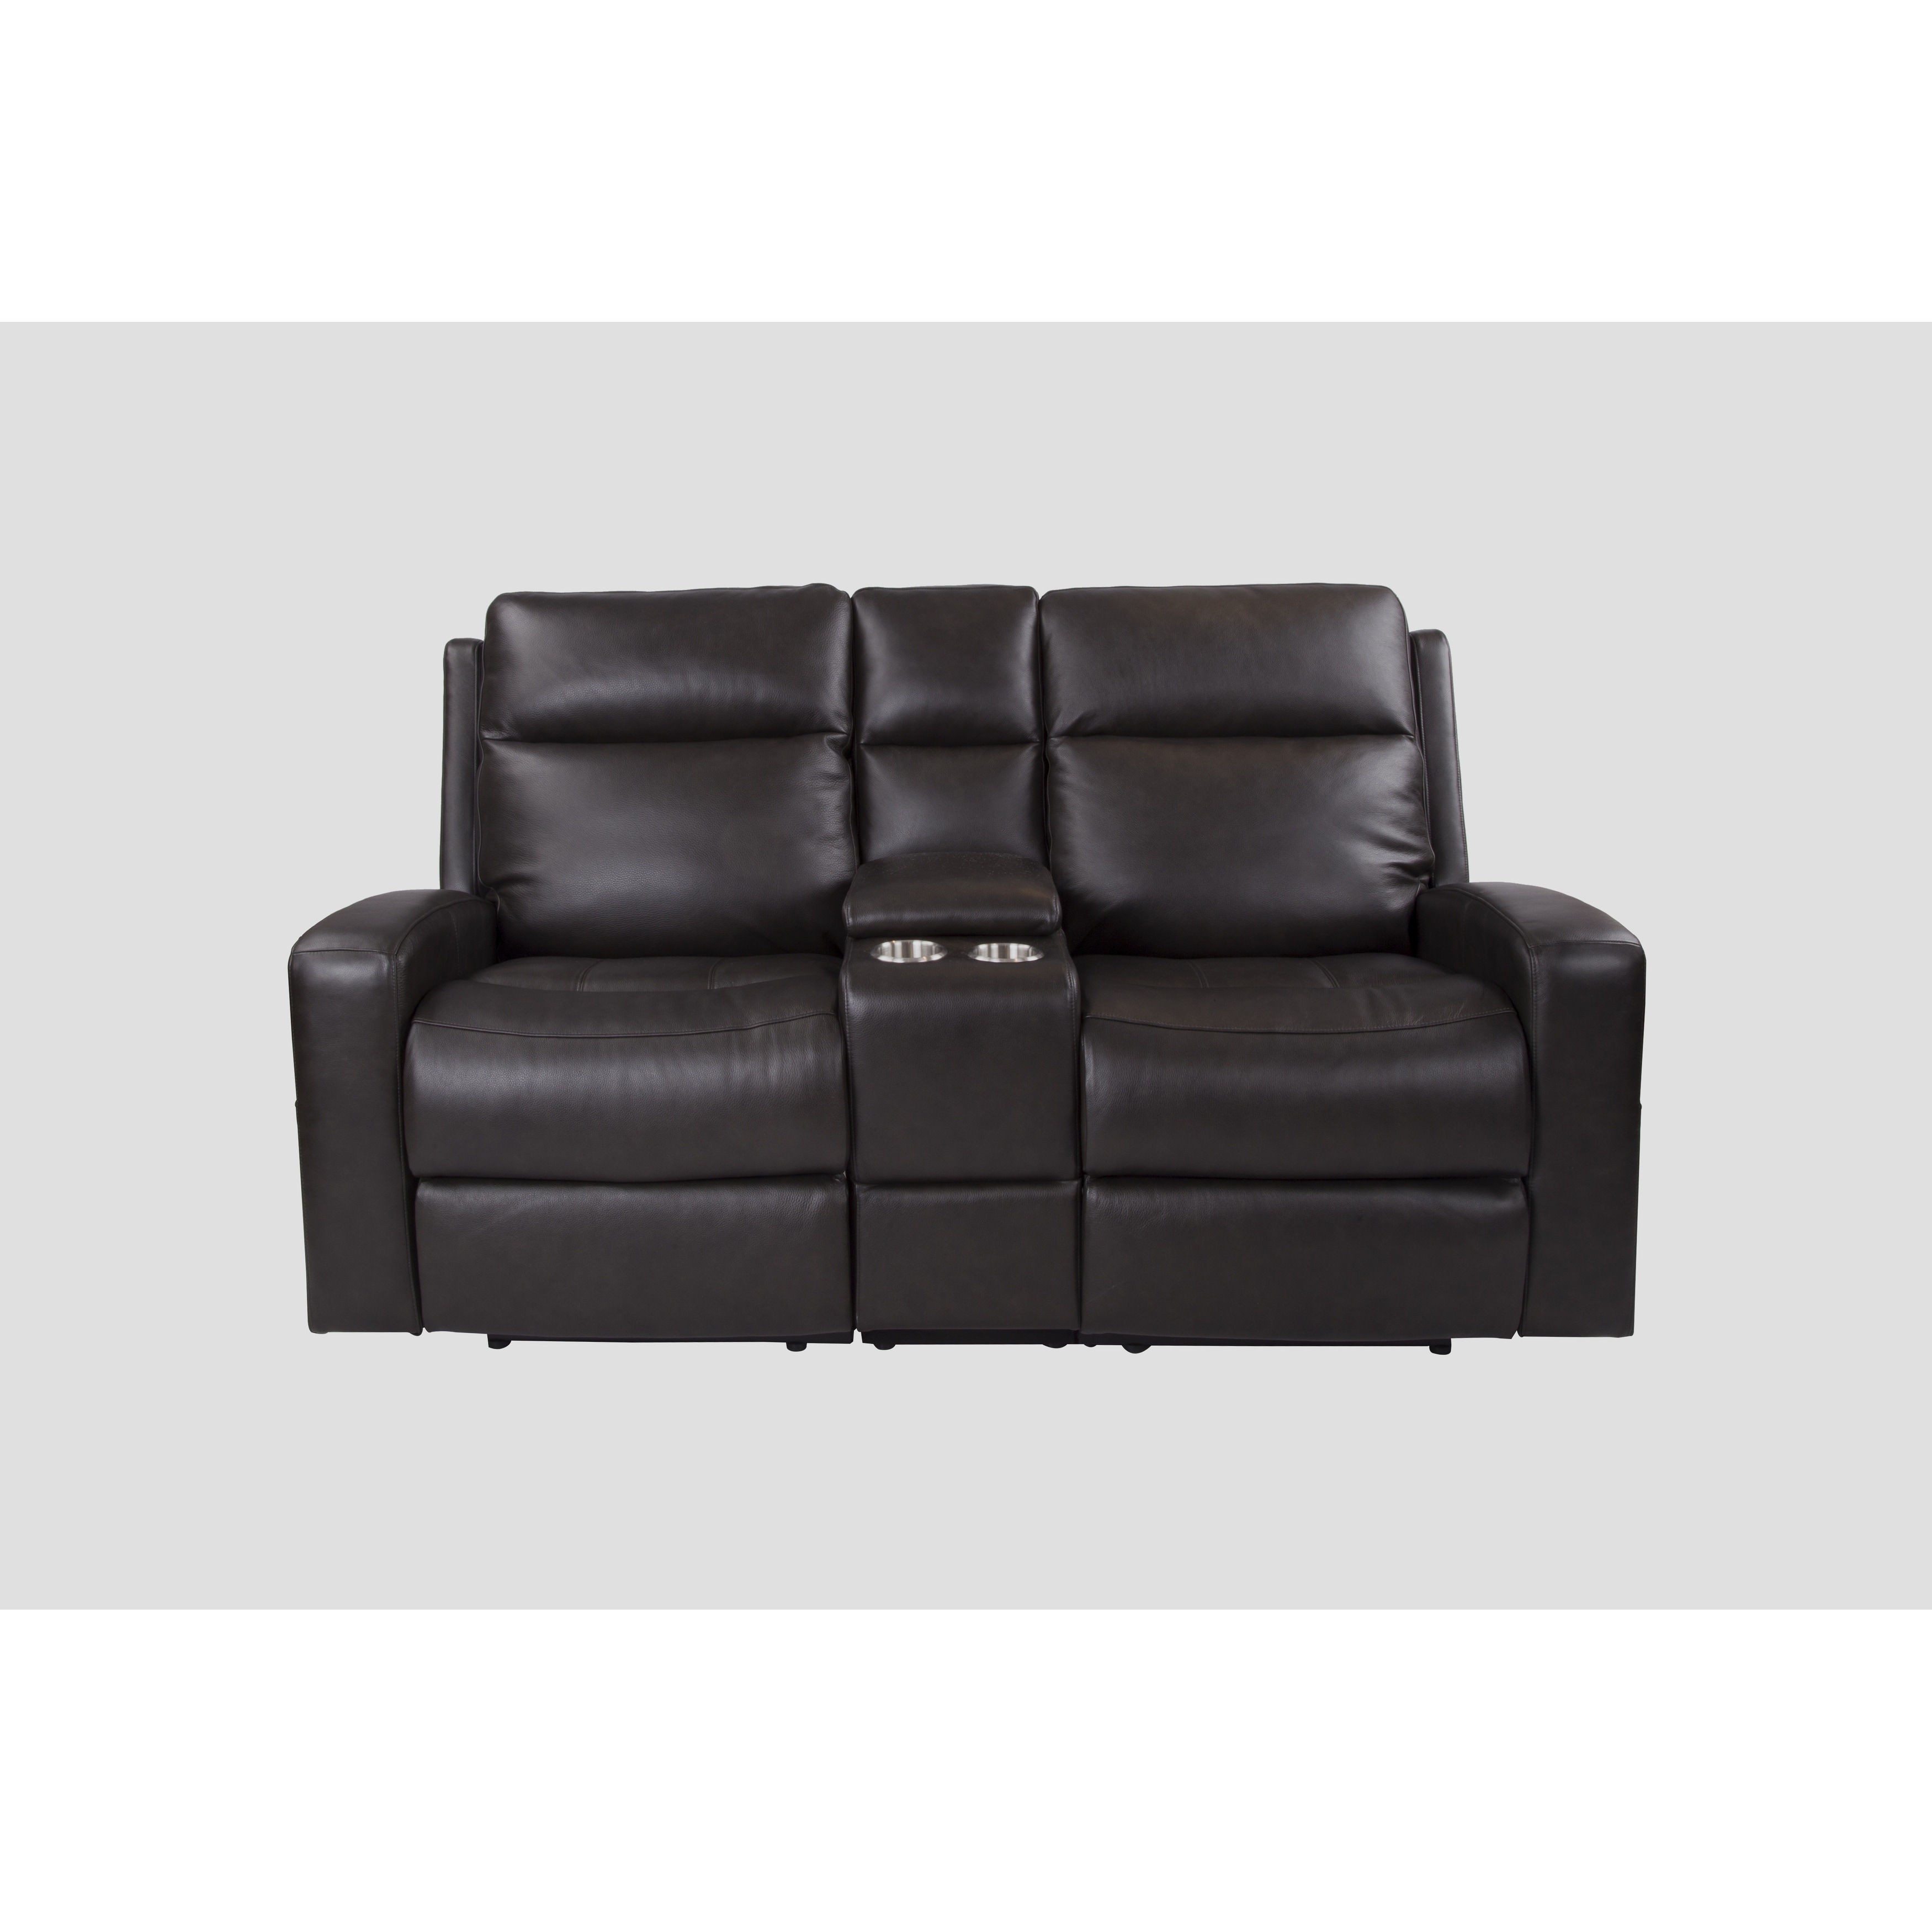 Urlivingroom Top Grain Leather Power Reclining Loveseat With Console Storage  Usb Charge Port - 79.5w*39.25d*40.5h